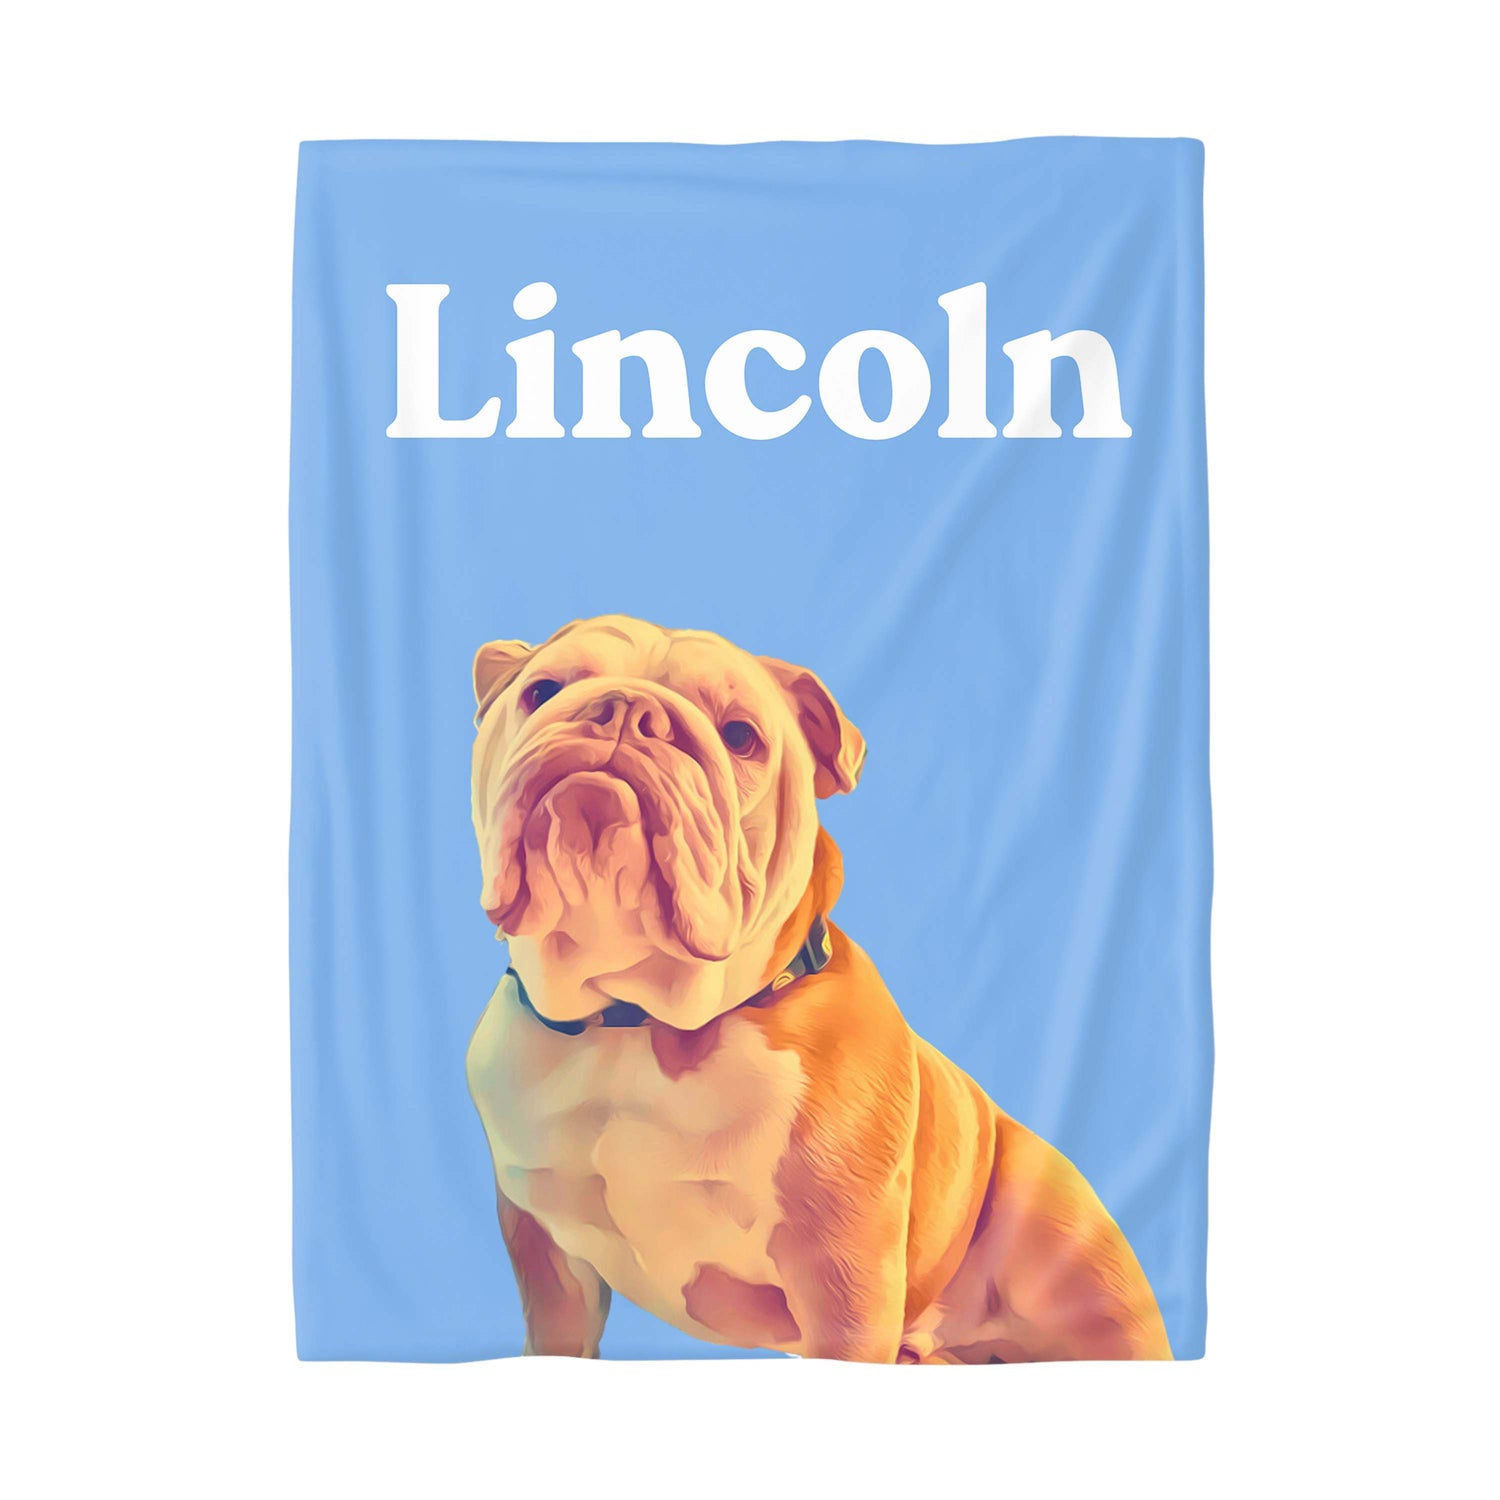 The Lincoln Blanket